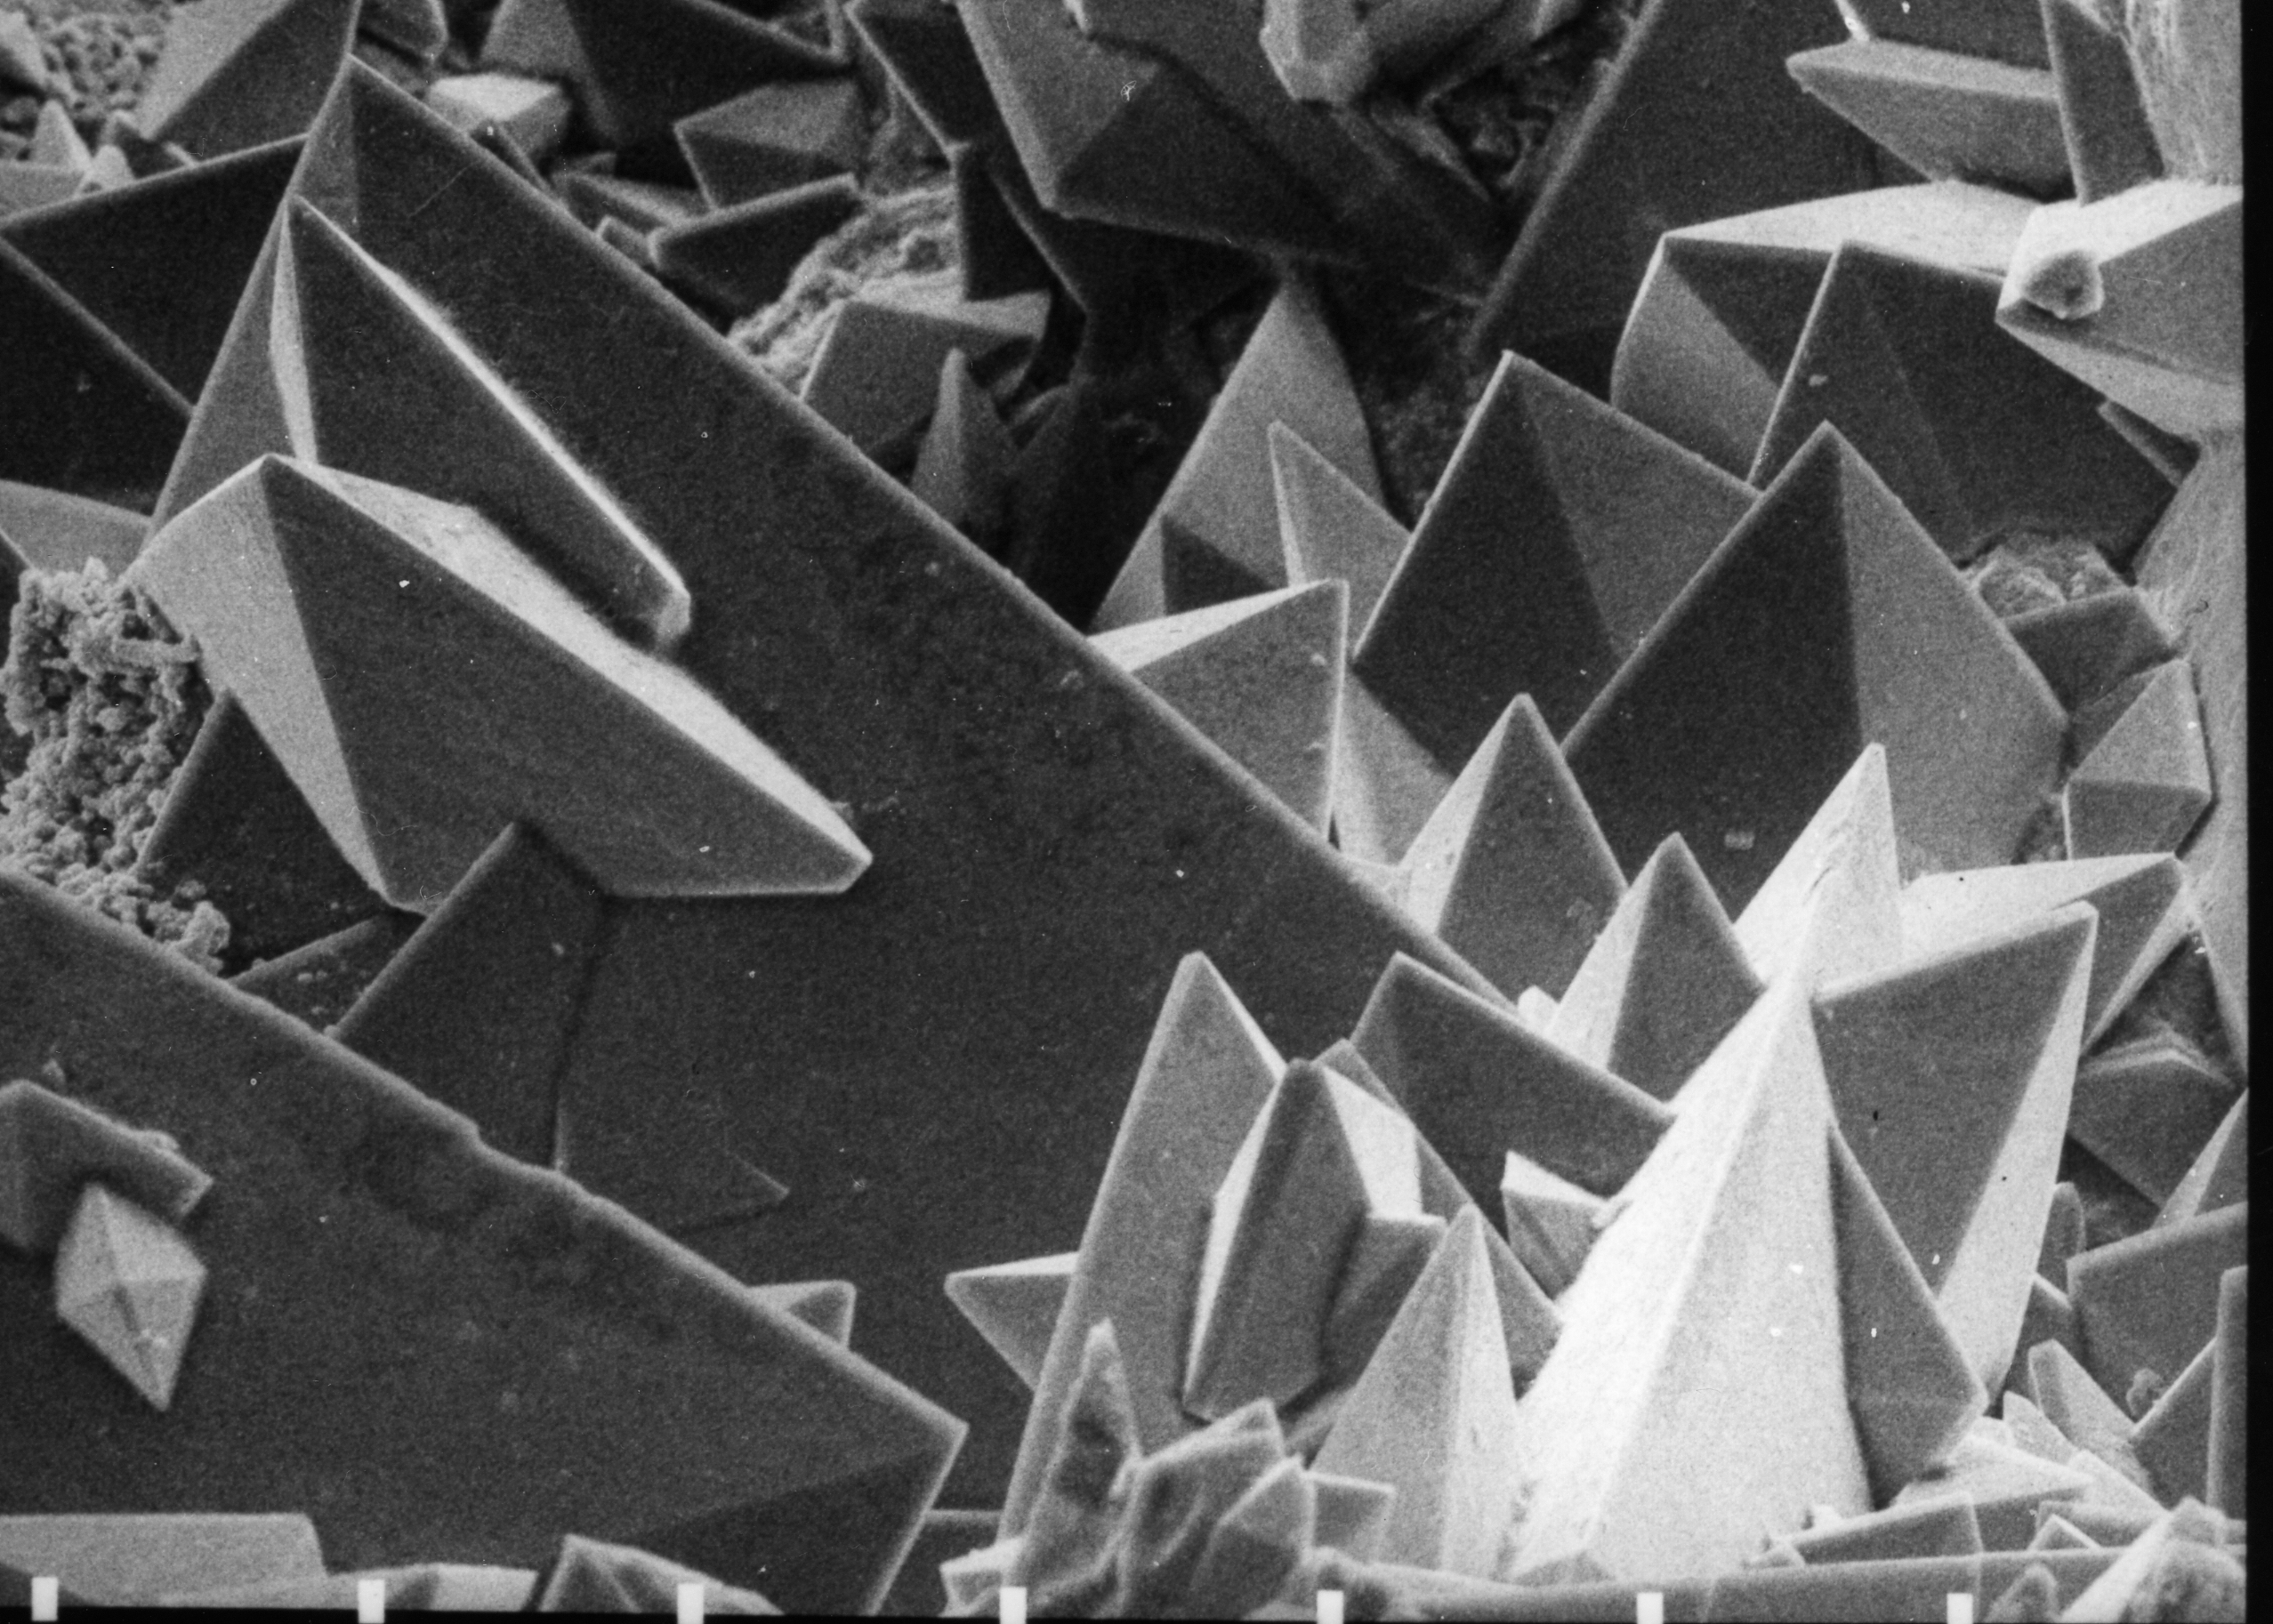 Calcium oxalate dihydrate crystals under Scanning Electron Micrograph (SEM) taken at 30 KV. Source: Wikimedia commons[17]